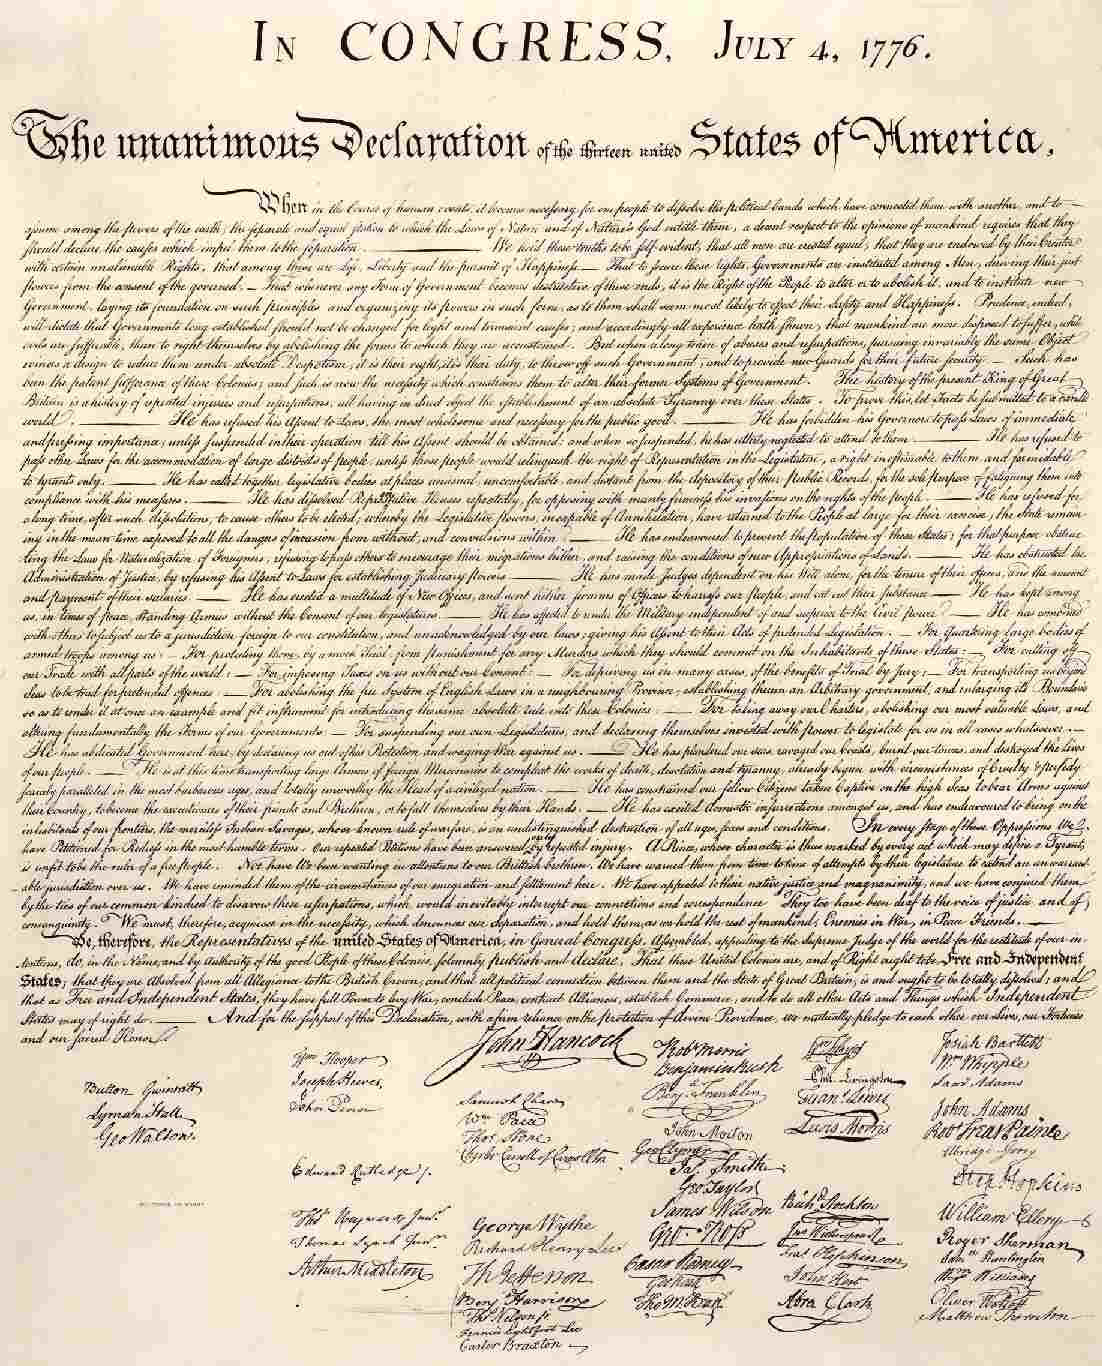 American Revolutionary War: word of the United States Declaration of Independence reaches London